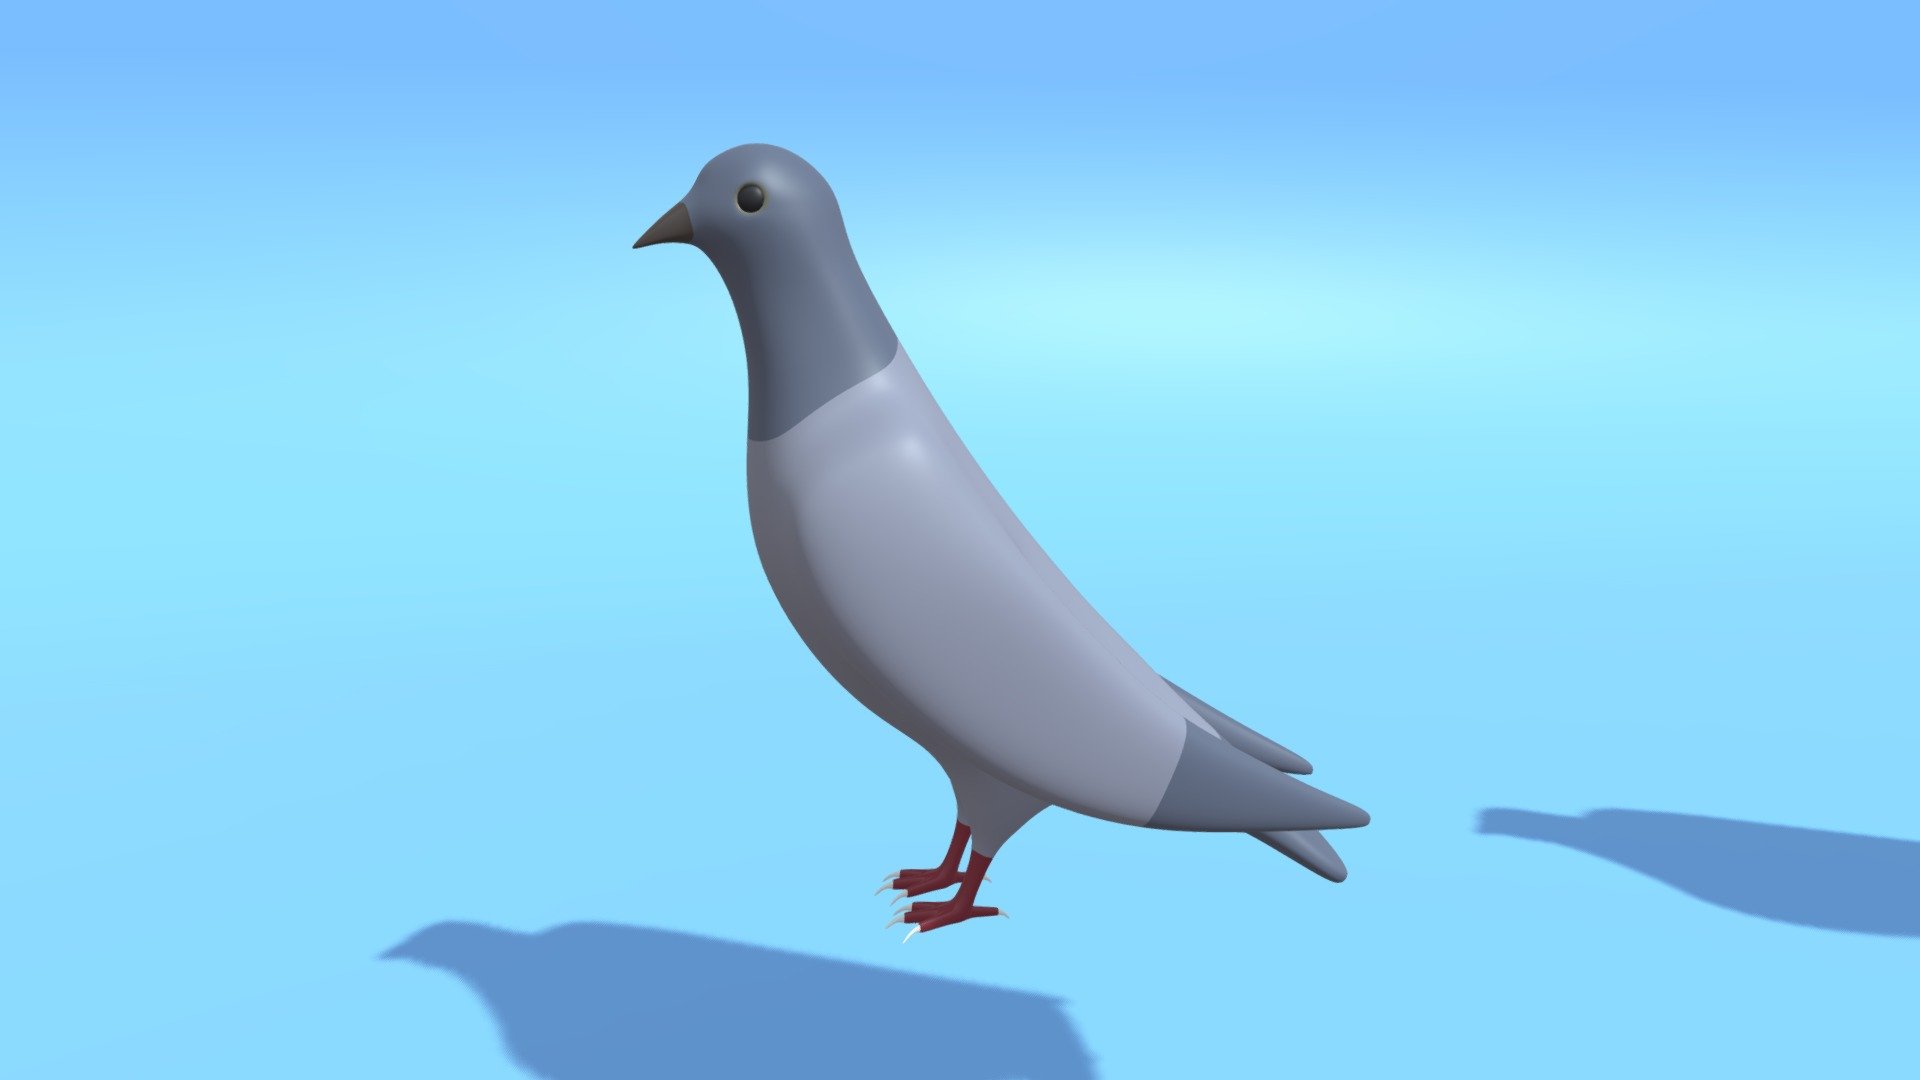 -Cartoon Cute Pigeon Dove.

-1 model contains 1 object.

-Subdivision Level 3 : Verts : 34,212 Faces : 34,304.

-Subdivision Level 2 : Verts : 10,278 Faces : 10,368.

-Subdivision Level 1 : Verts : 2,566 Faces : 2608.

-Materials and objects have the correct names.

-This product was created in Blender 2.8

-Formats: blend, fbx, obj, c4d, dae, abc, stl, glb,unitypackage.

-We hope you enjoy this model.

-Thank you 3d model